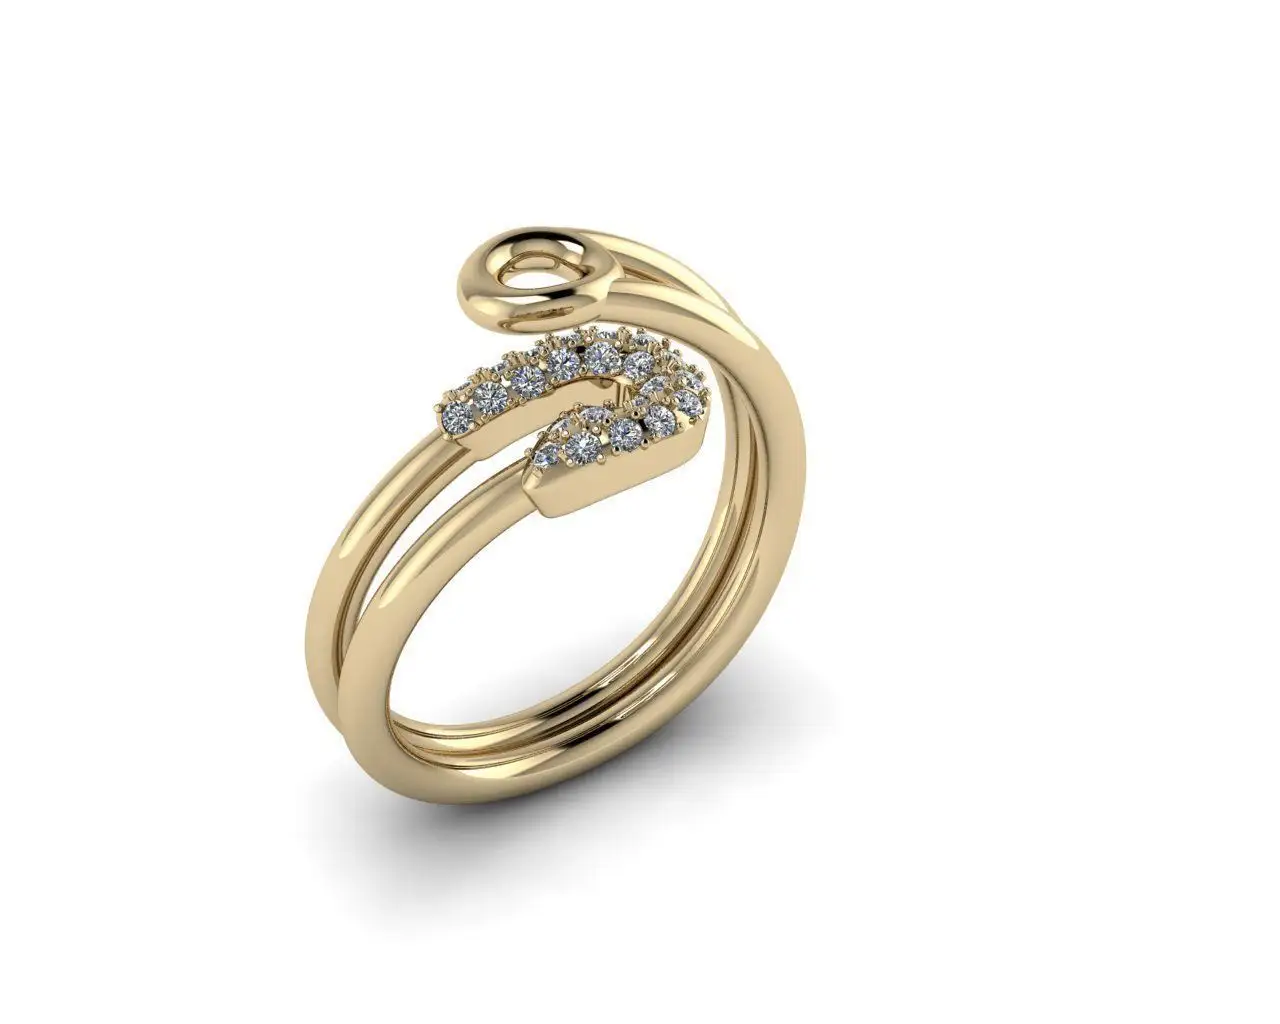 FirstMadam High Quality Fine Jewelry 18K Solid Gold Engagement Diamonds Ring